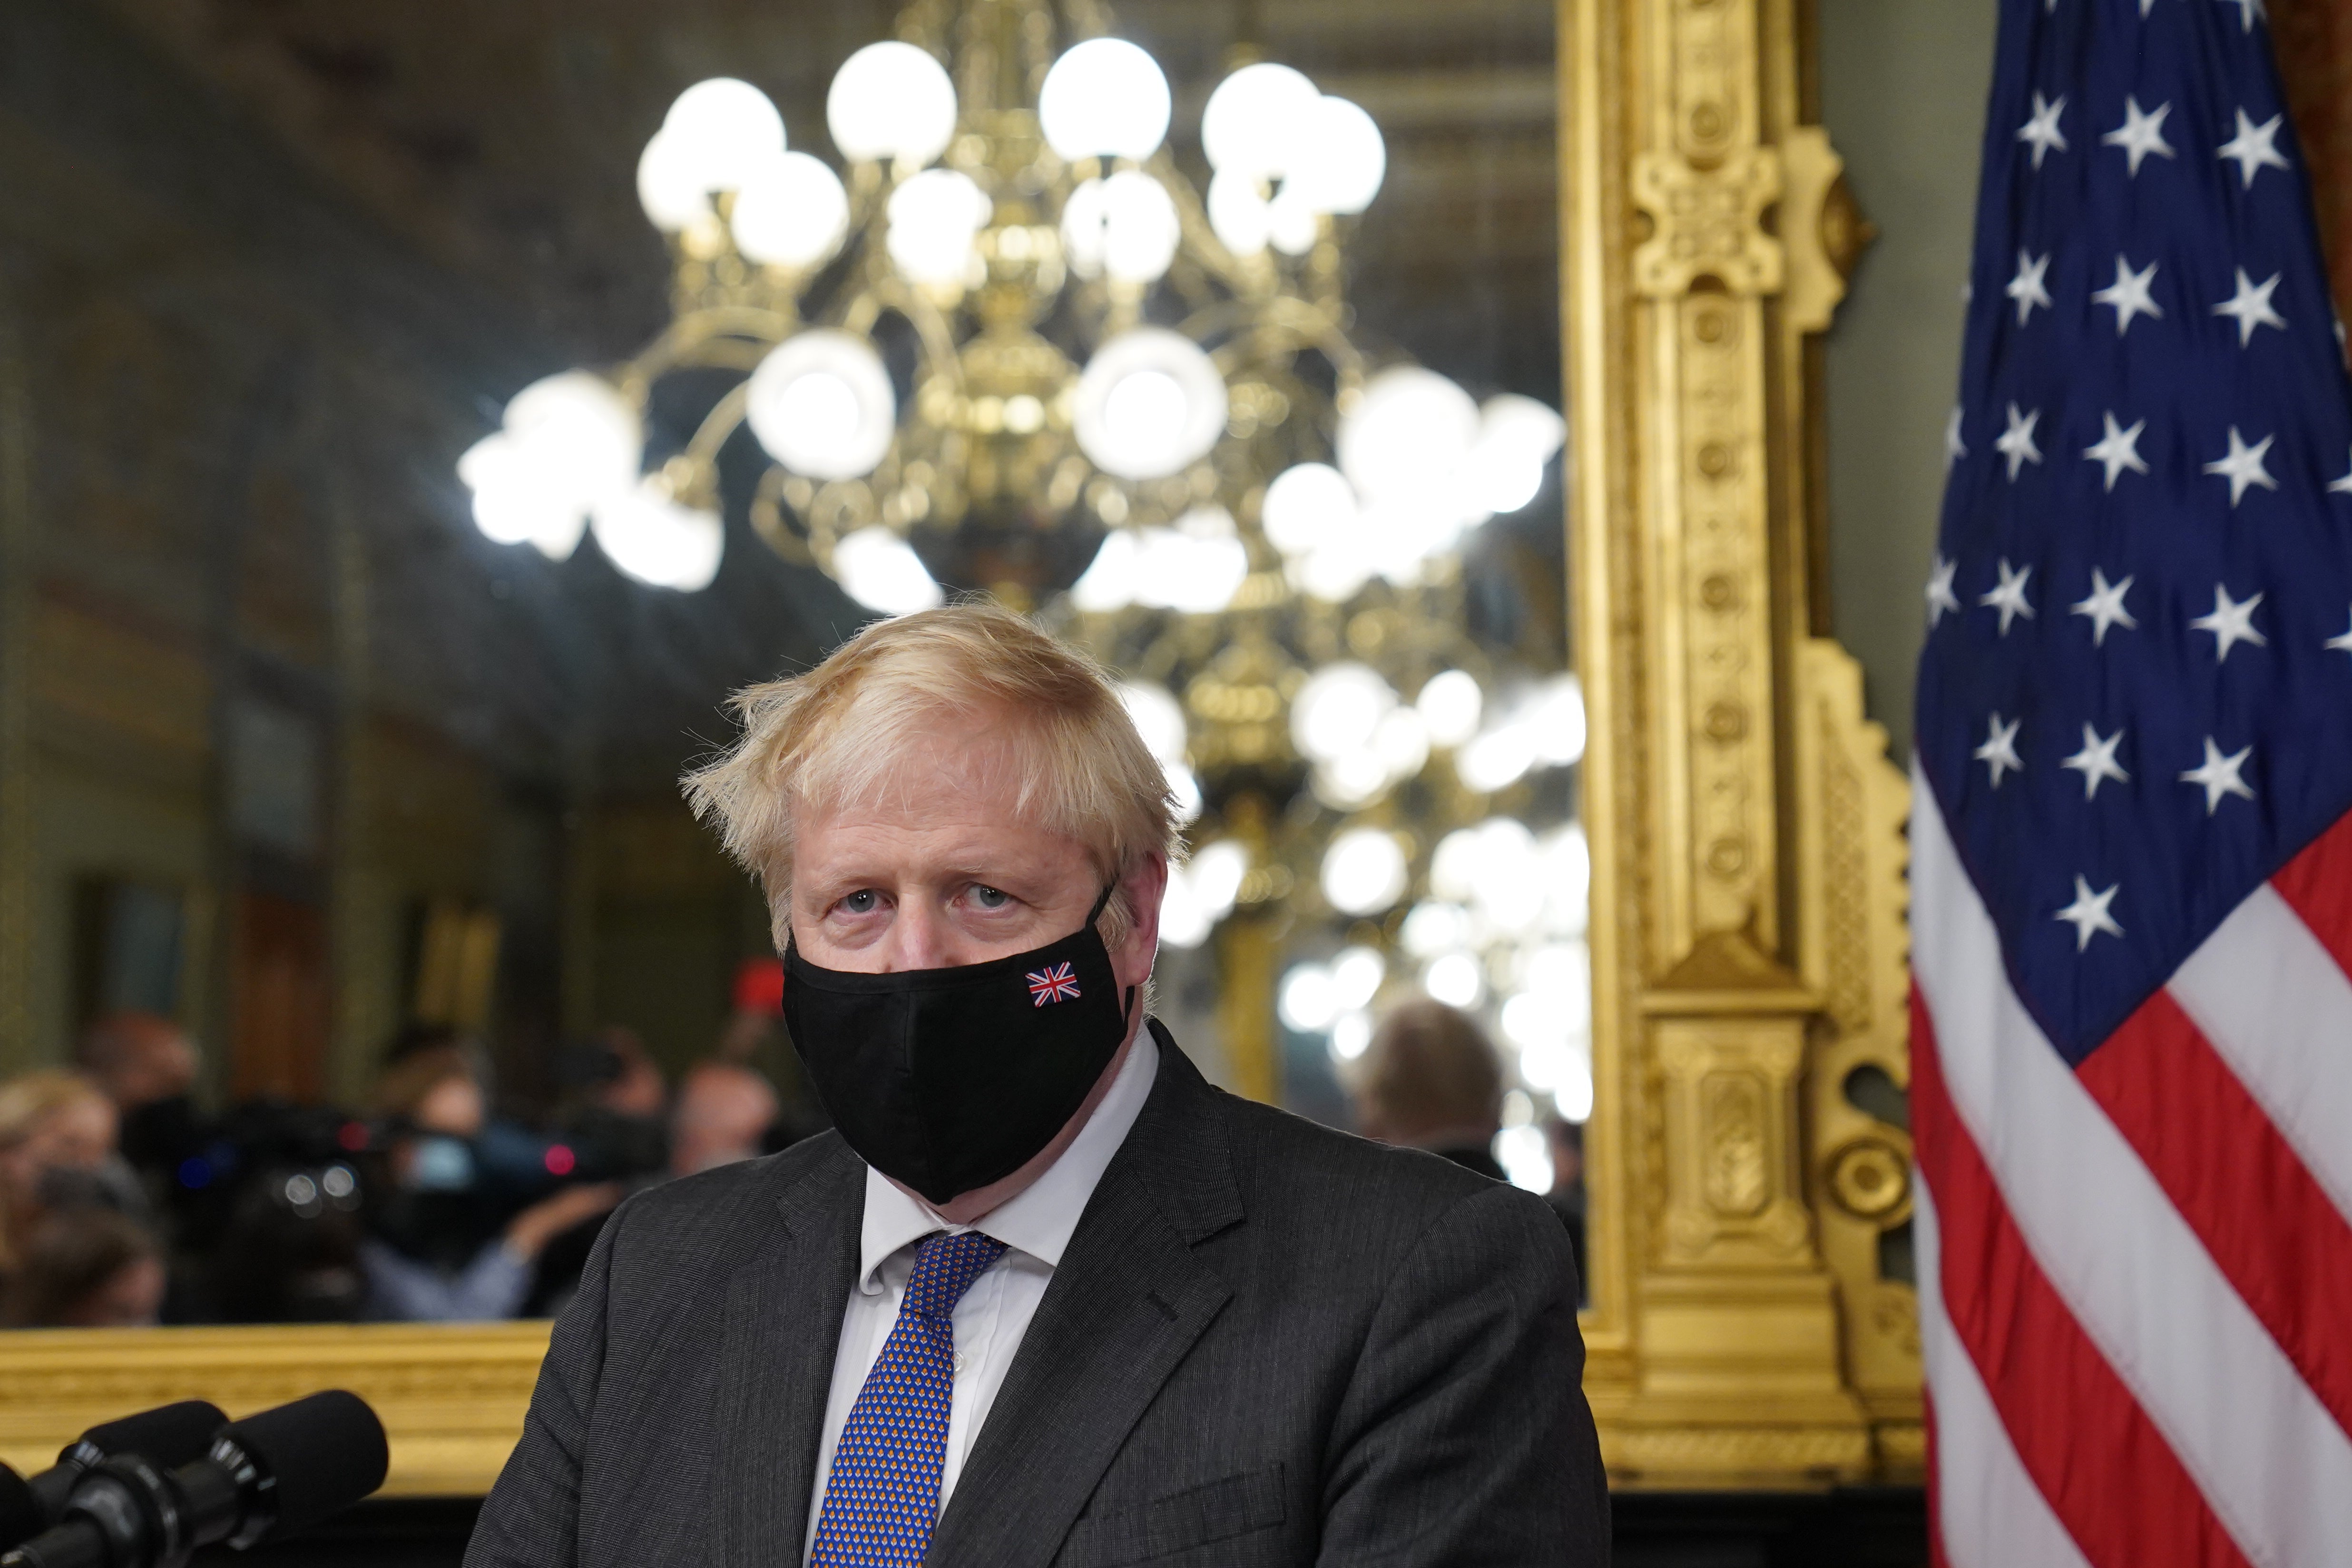 Prime Minister Boris Johnson in the vice president’s office in the Eisenhower Executive Office Building, next to the White House